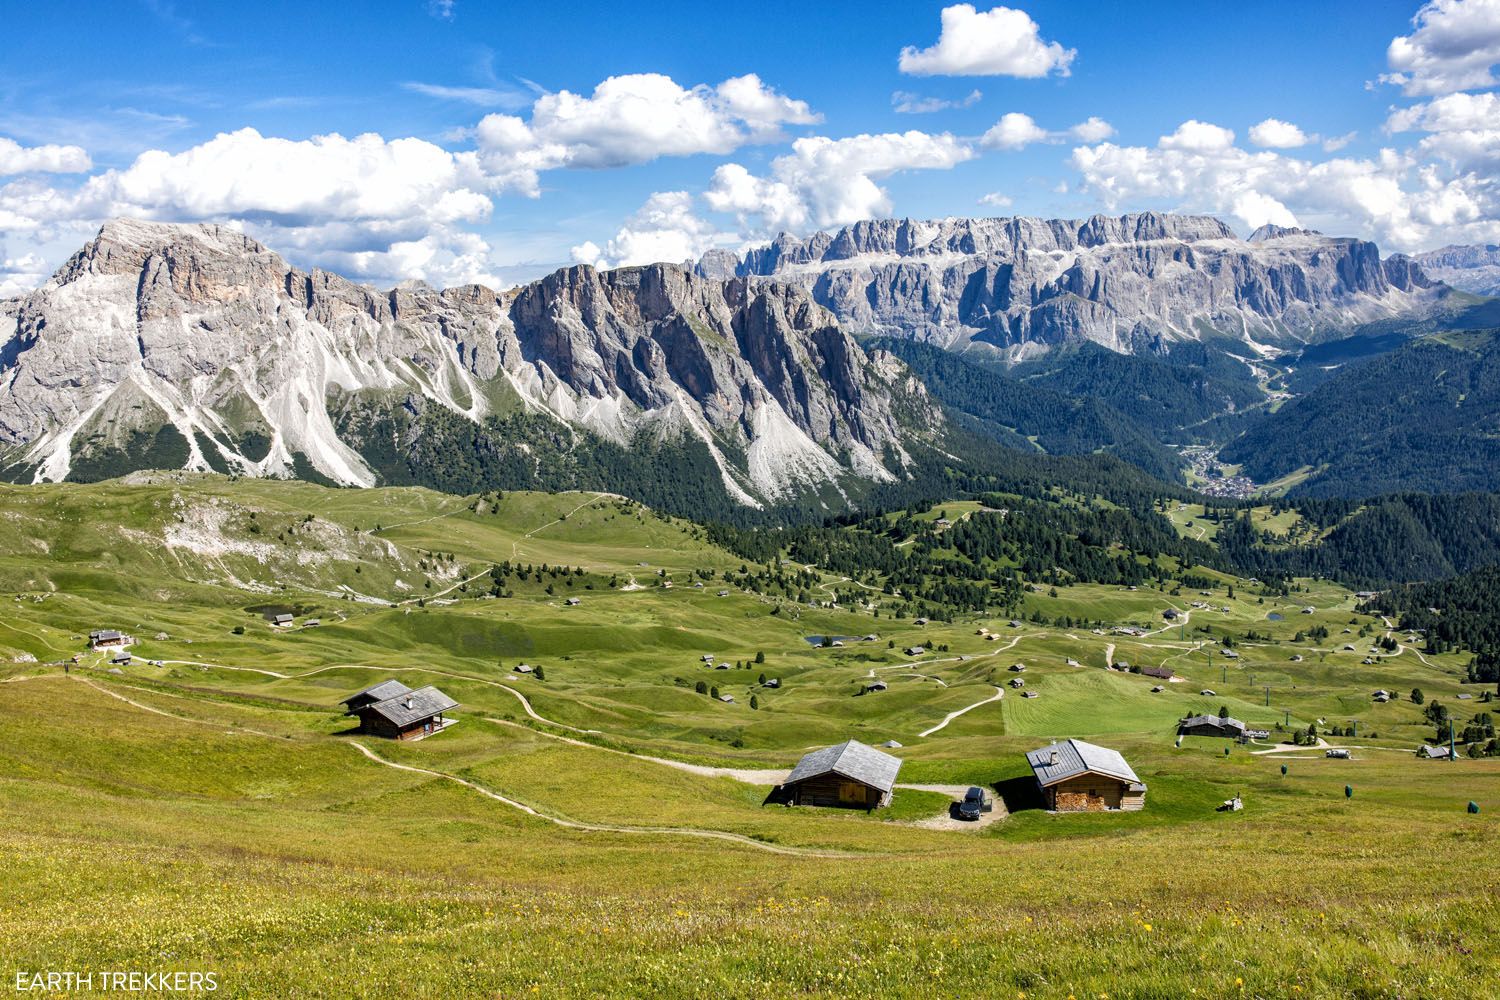 Short Hikes in the Dolomites